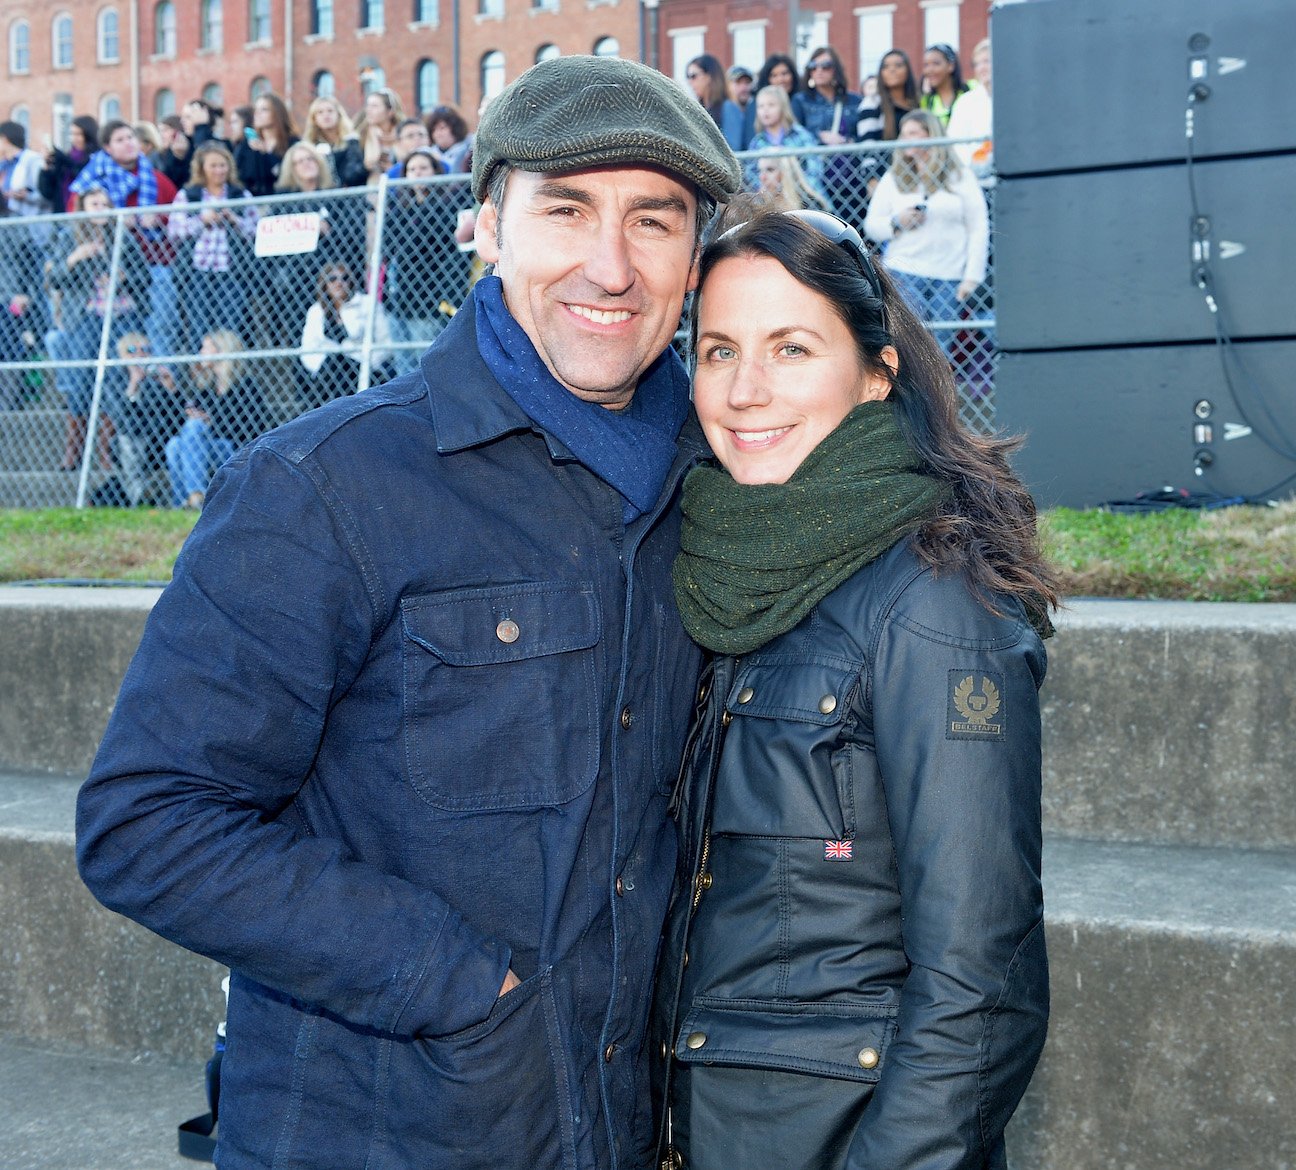 Mike Wolfe from 'American Pickers' smiling with wife Jodi Faeth 